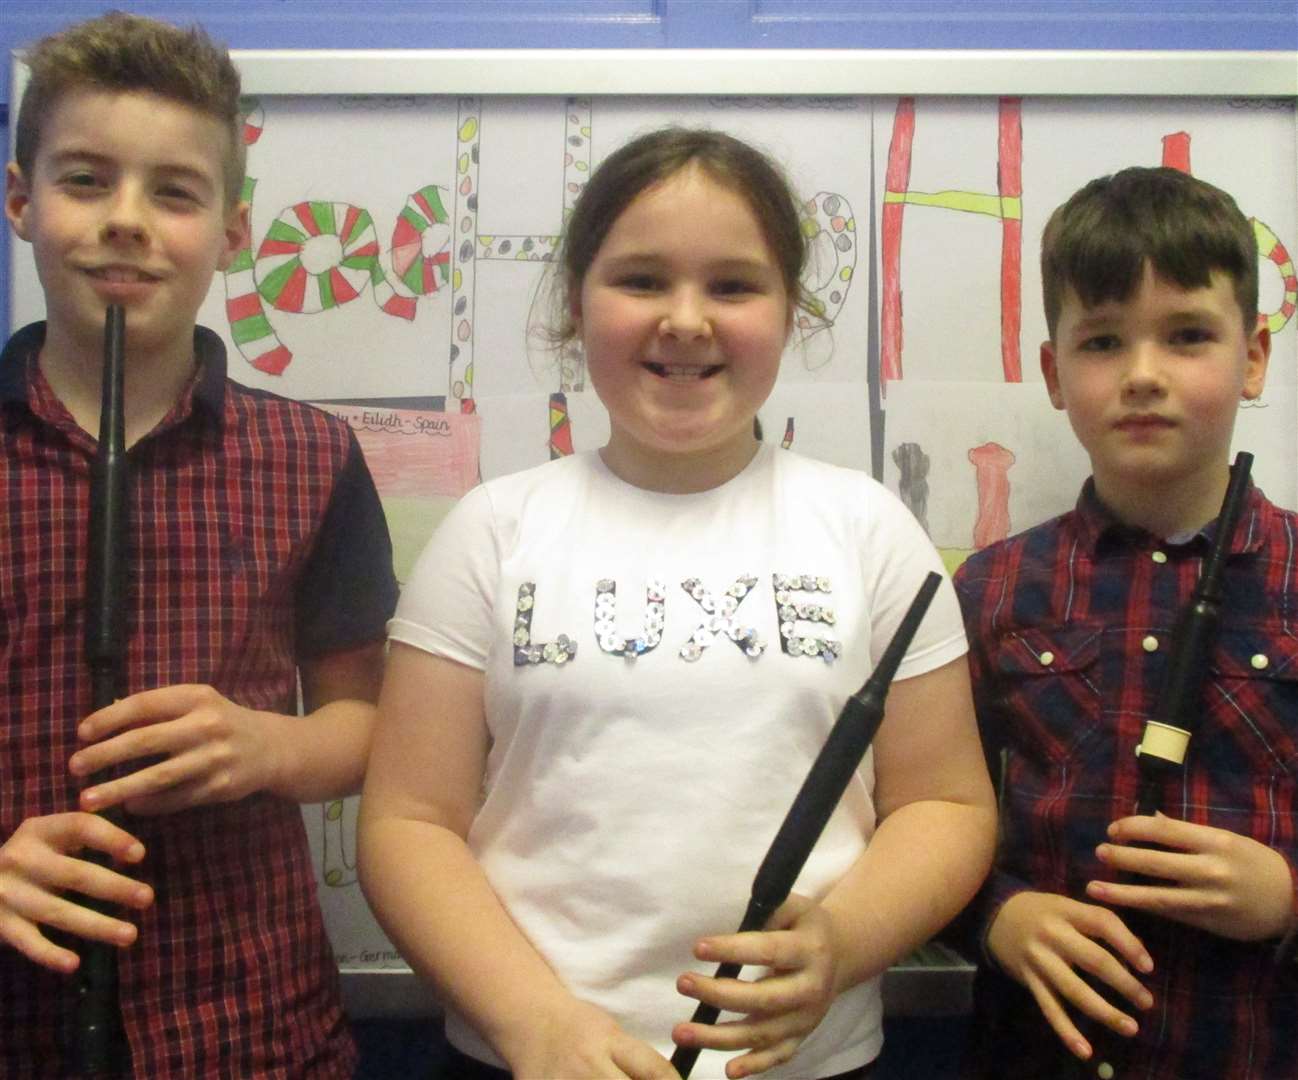 The trio of chanter players who played Amazing Grace at Miller Academy's Scottish show.